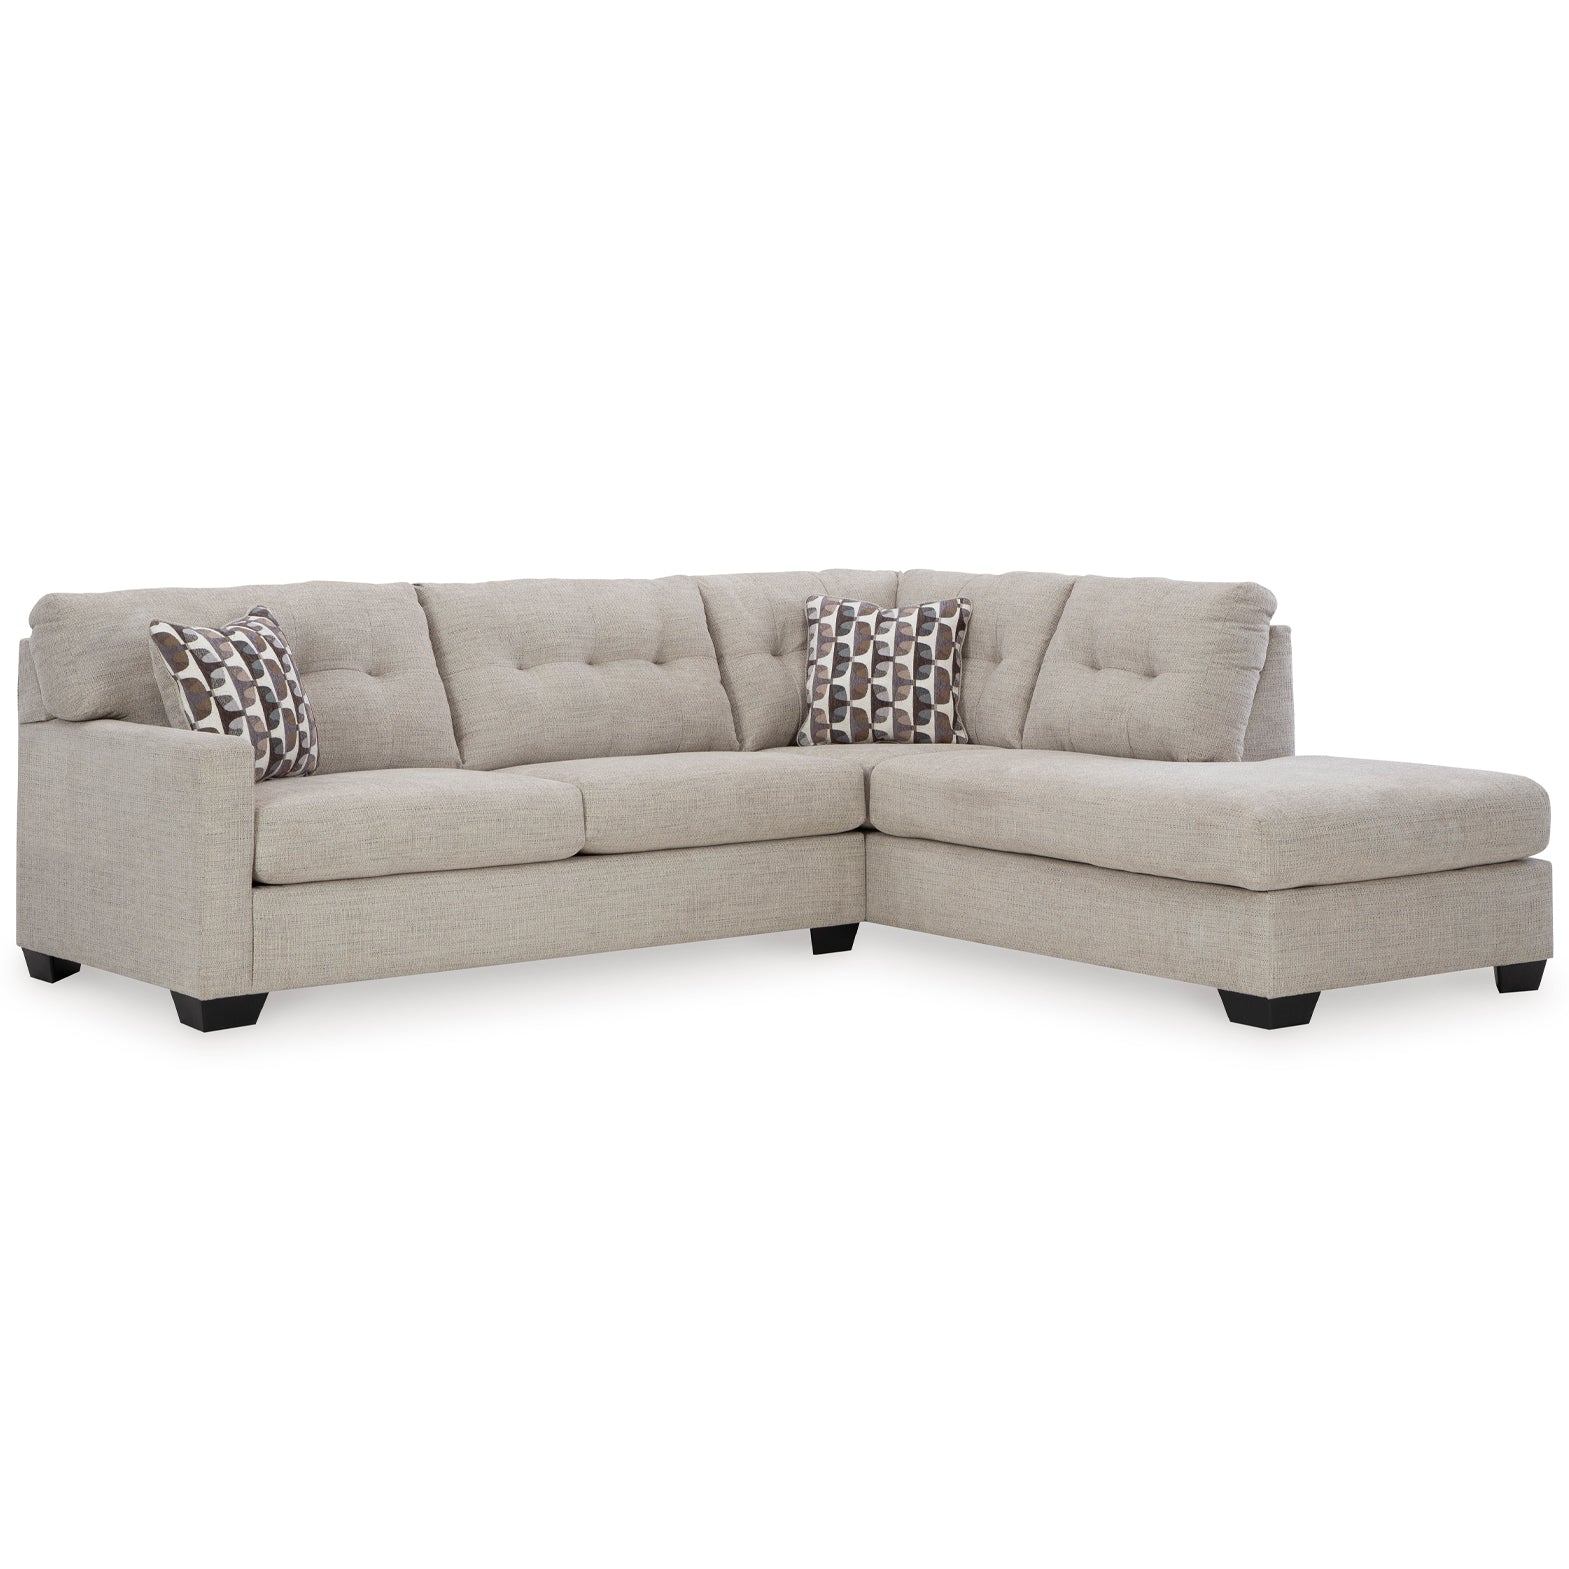 Mahoney 2-Piece Sectional with Chaise in Pebble Color